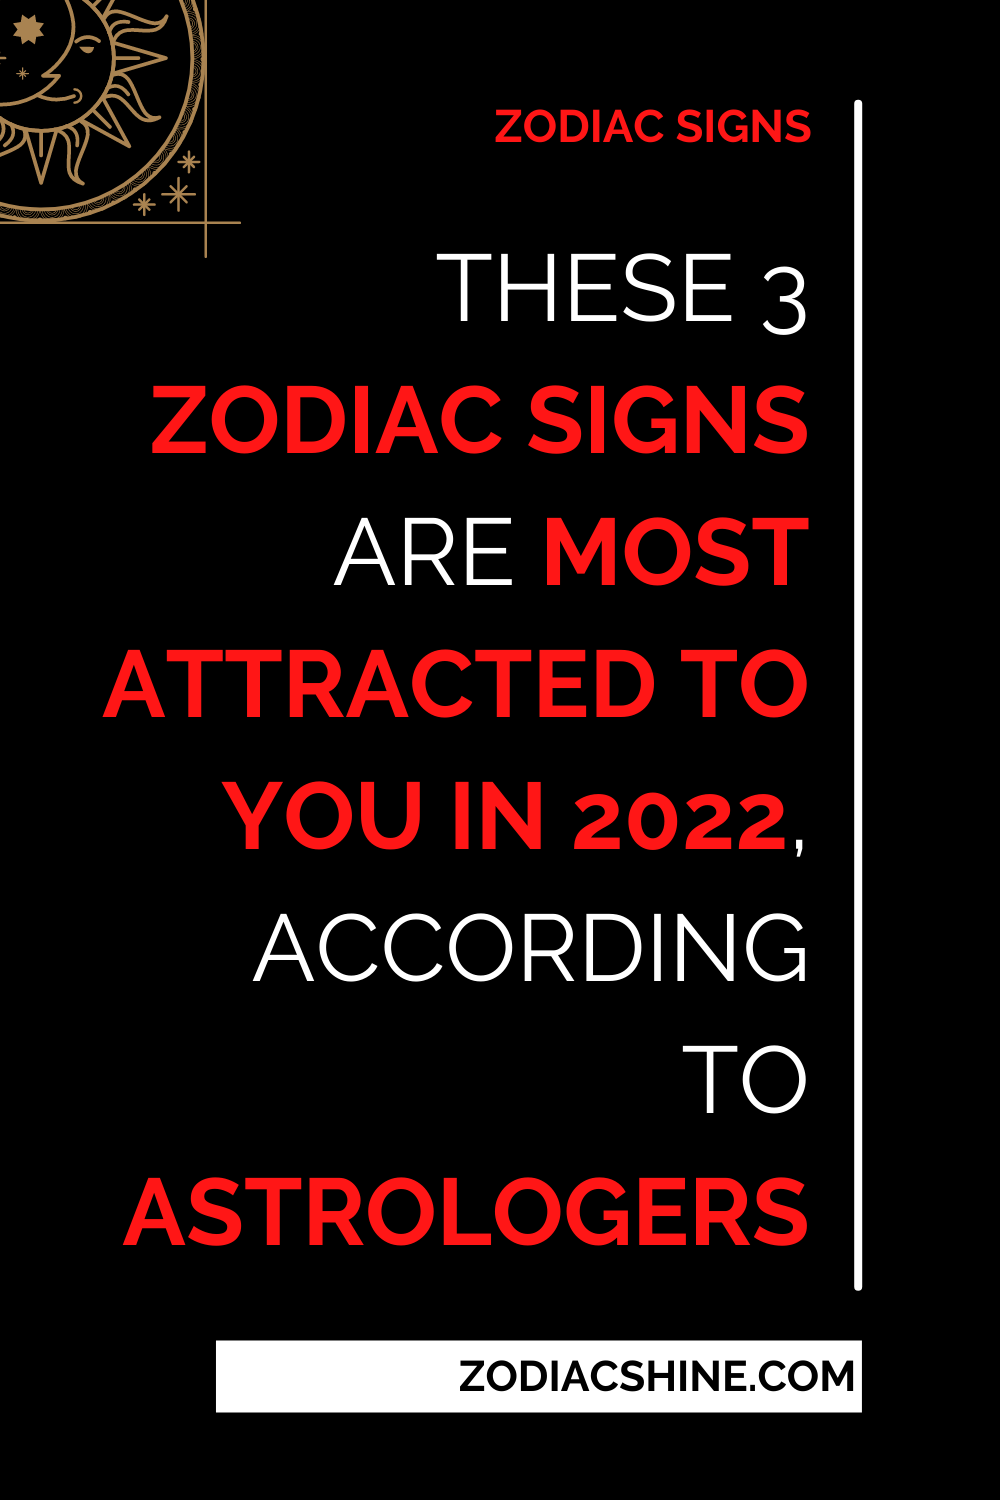 These 3 Zodiac Signs Are Most Attracted To You In 2022 According To Astrologers